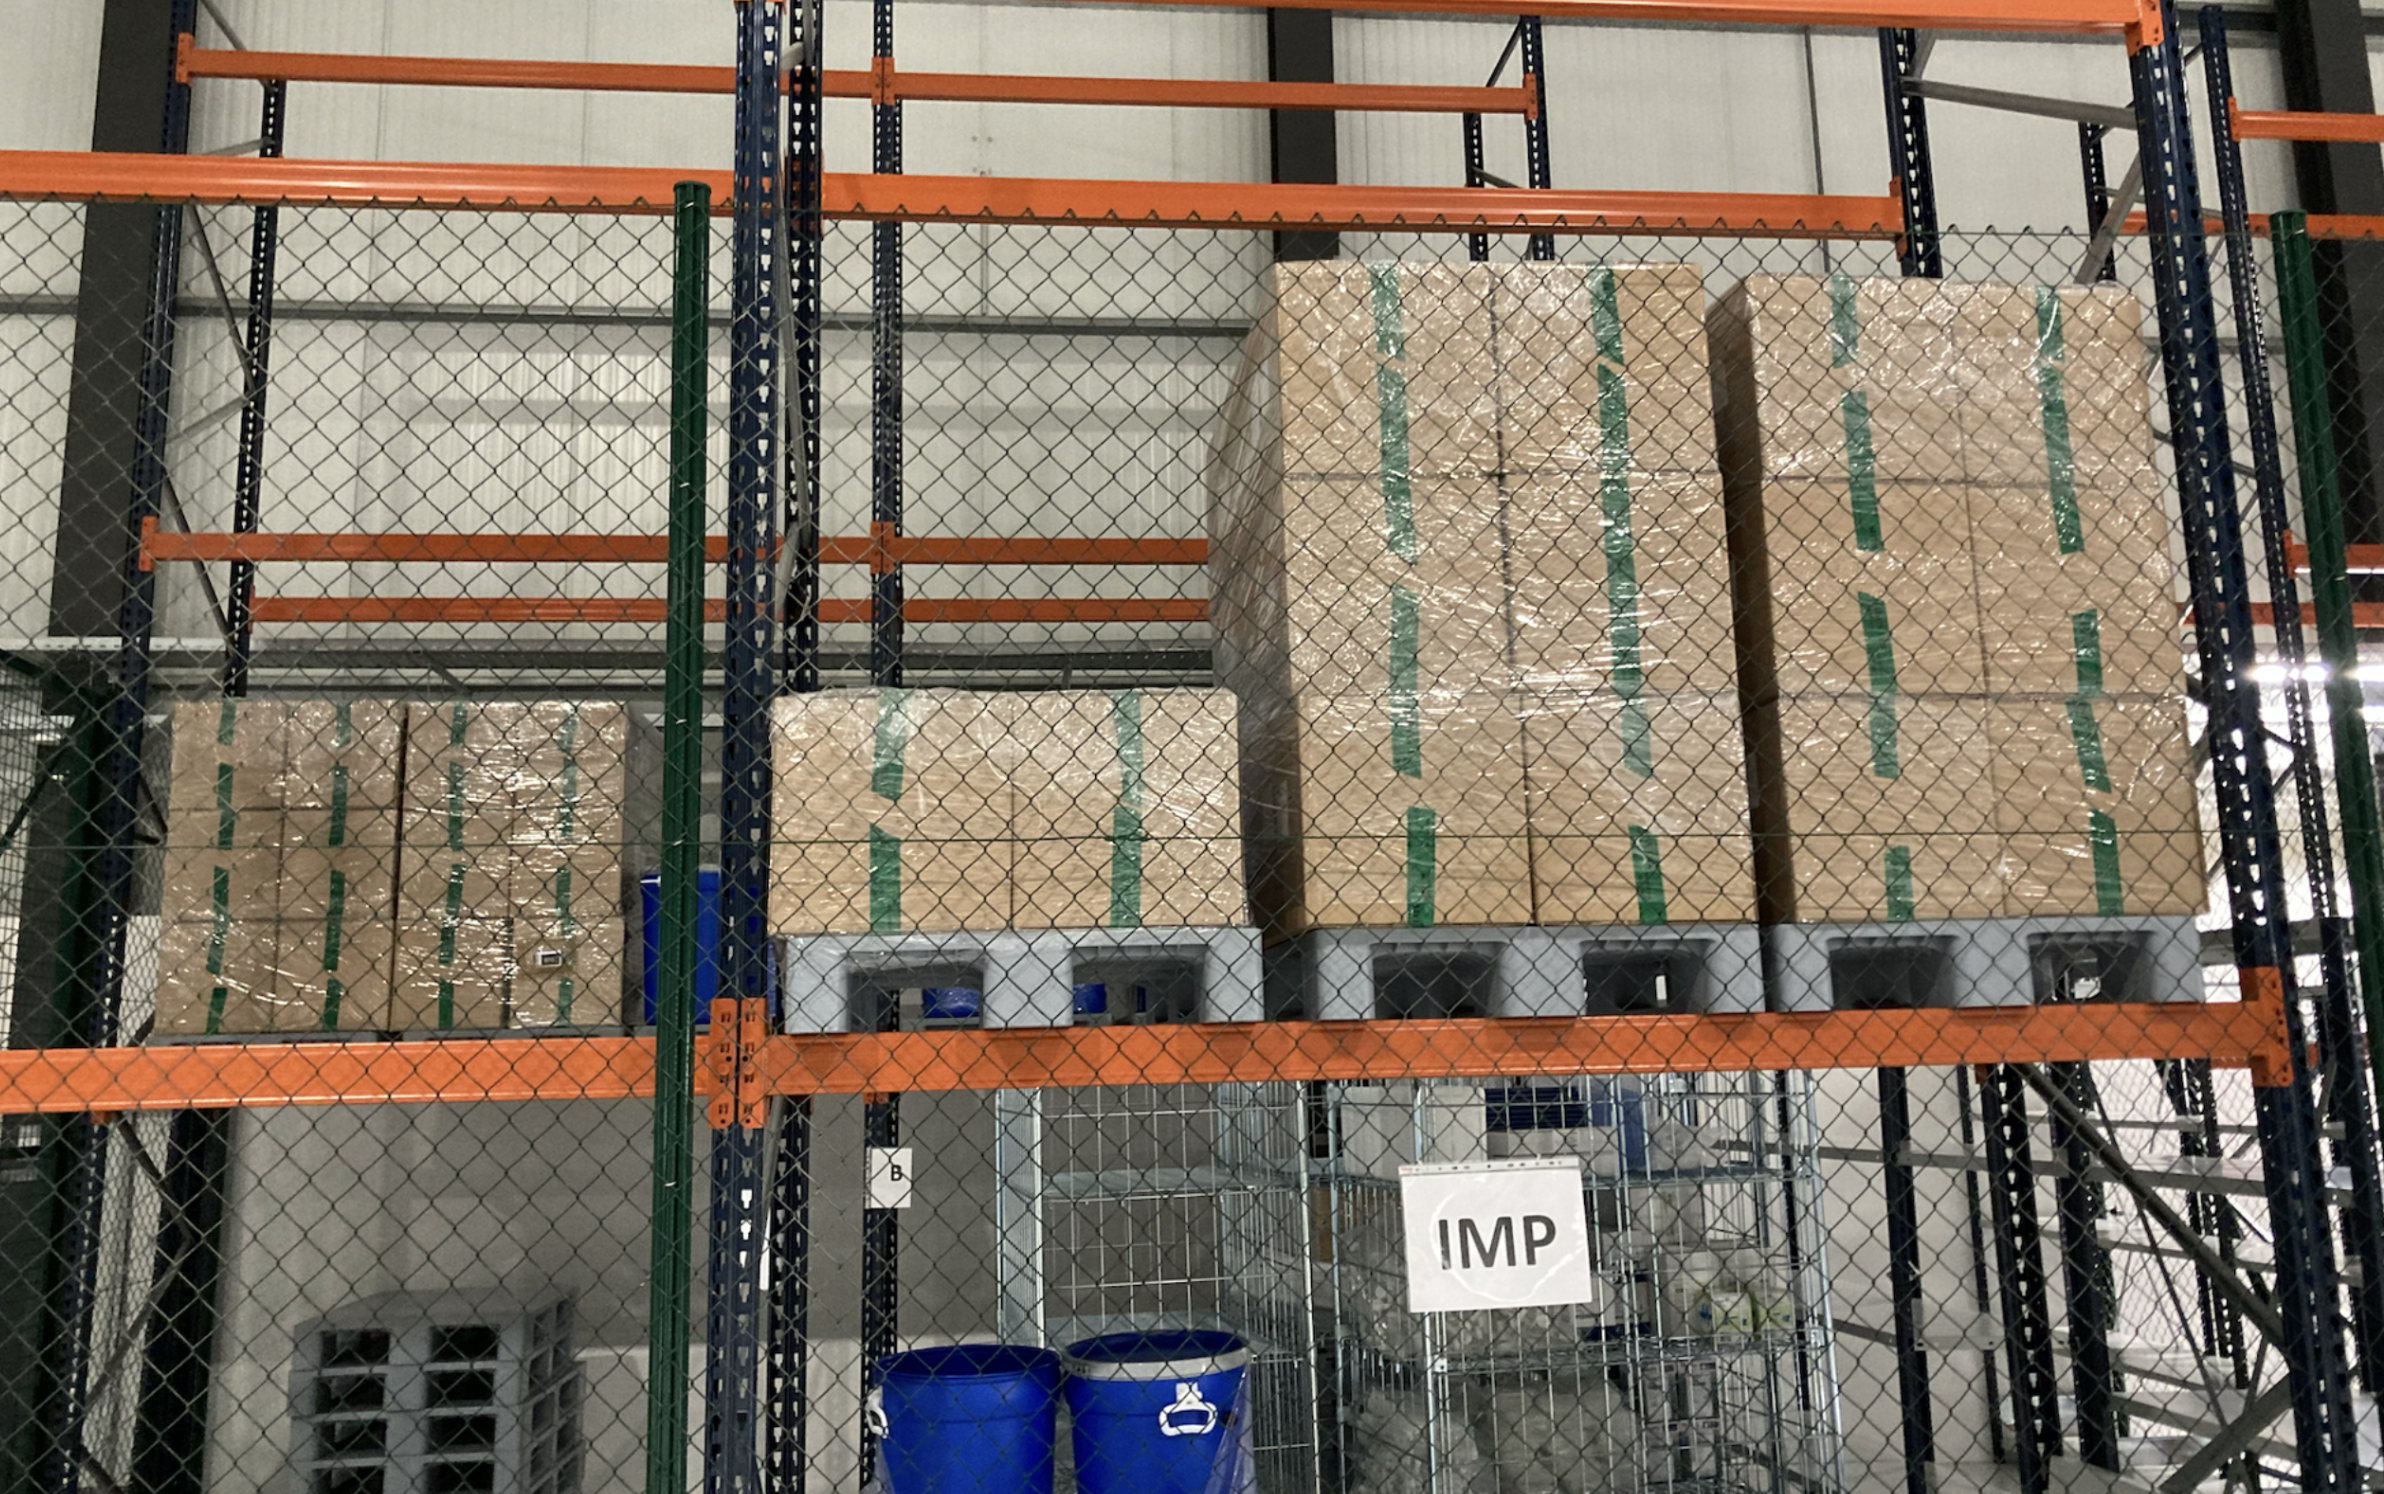 Around 400kg of boxed up cannabis “biomass” at Somai Pharmaceuticals' production lab